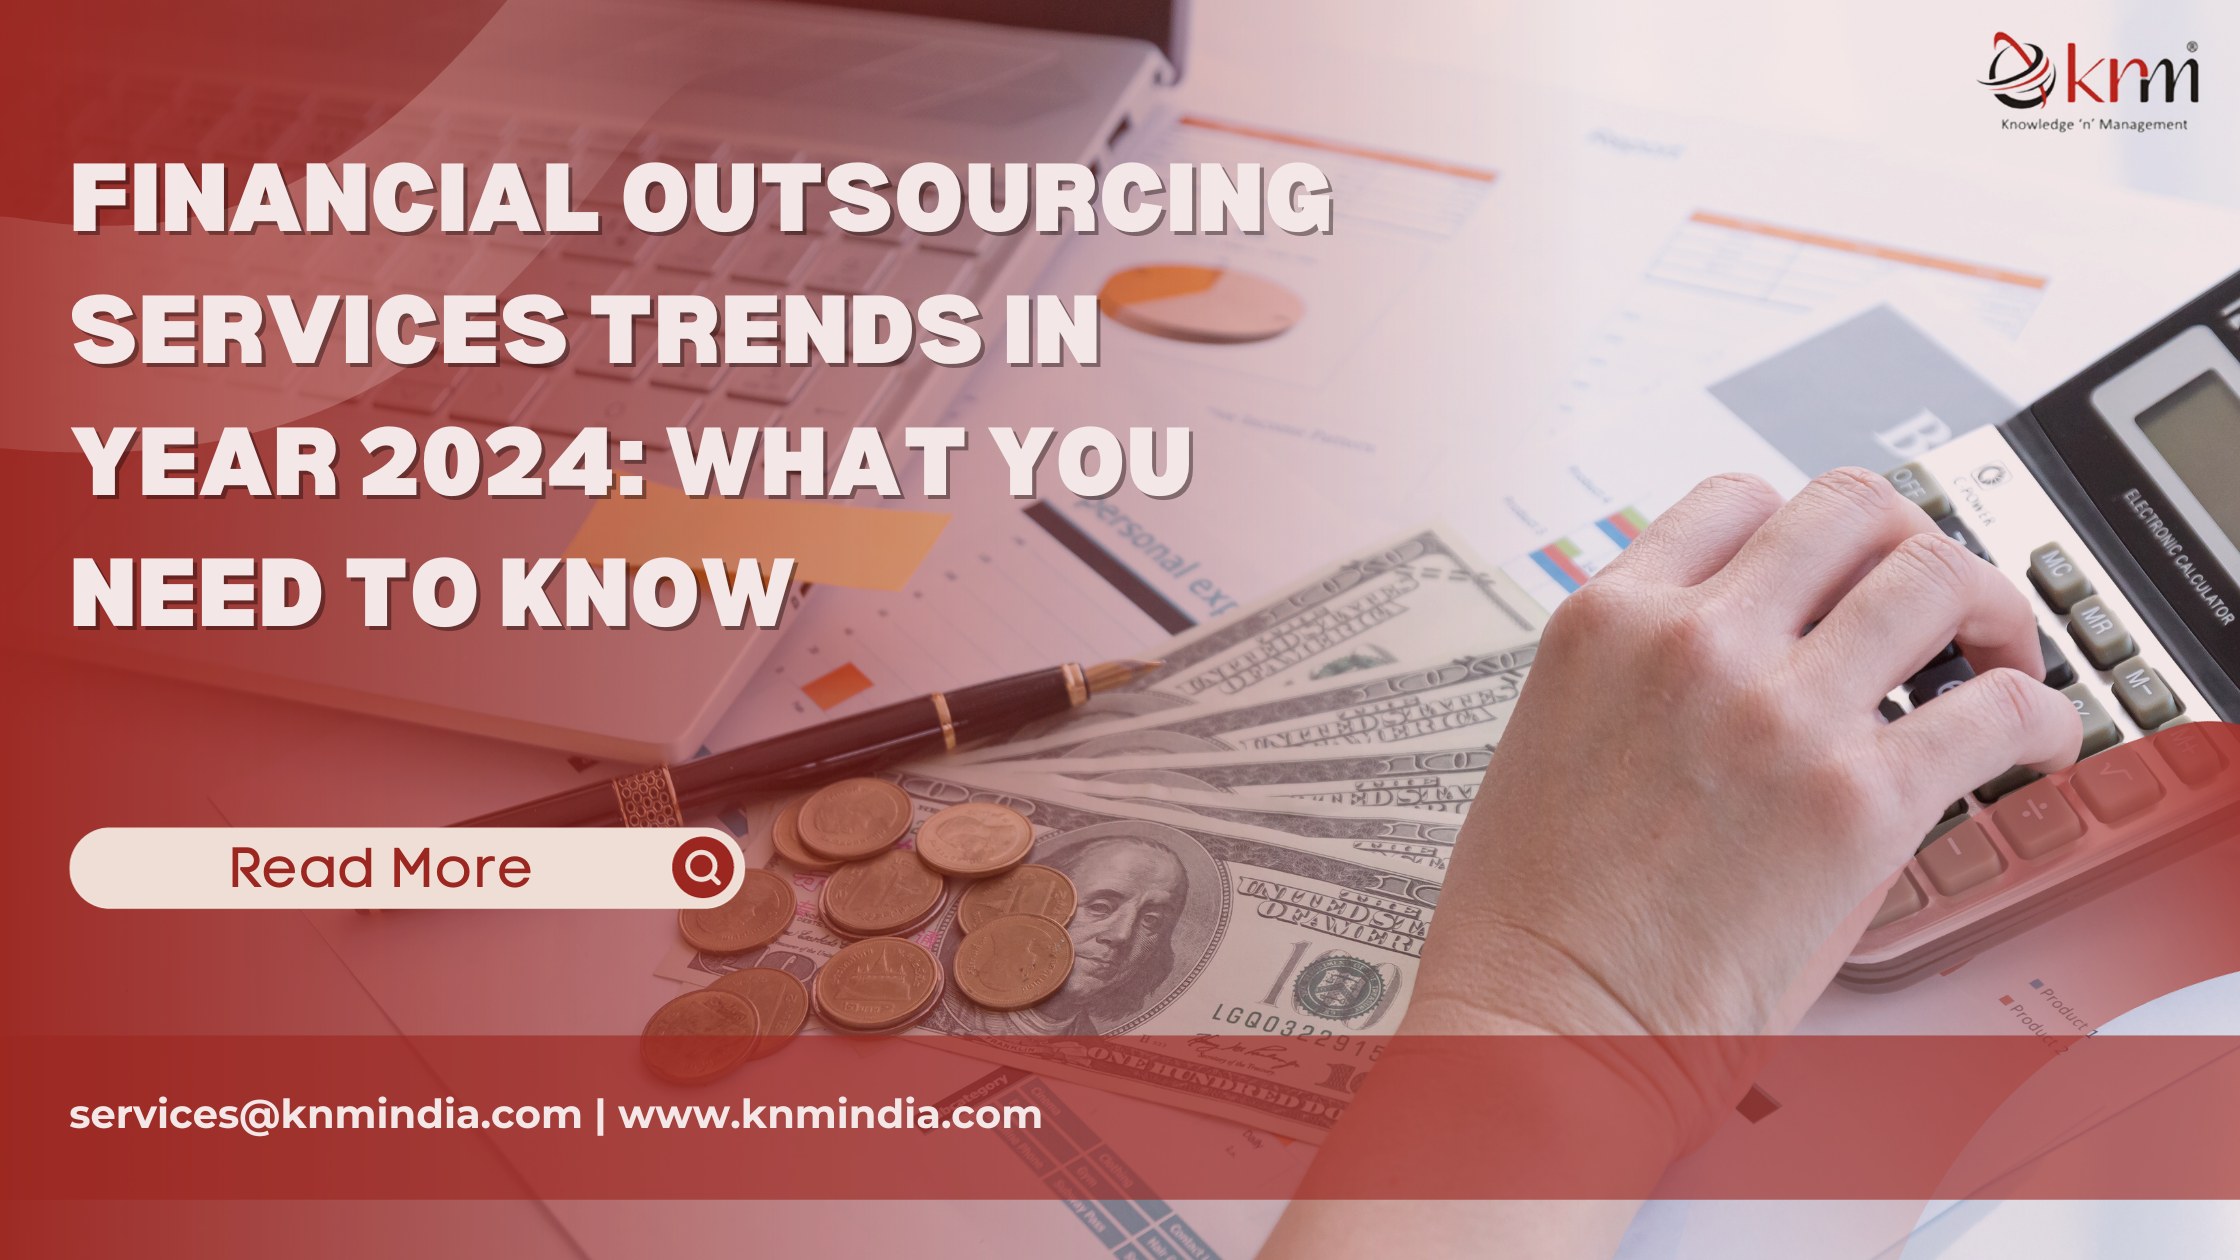 Financial Outsourcing Services Trends in Year 2024: What You Need to Know